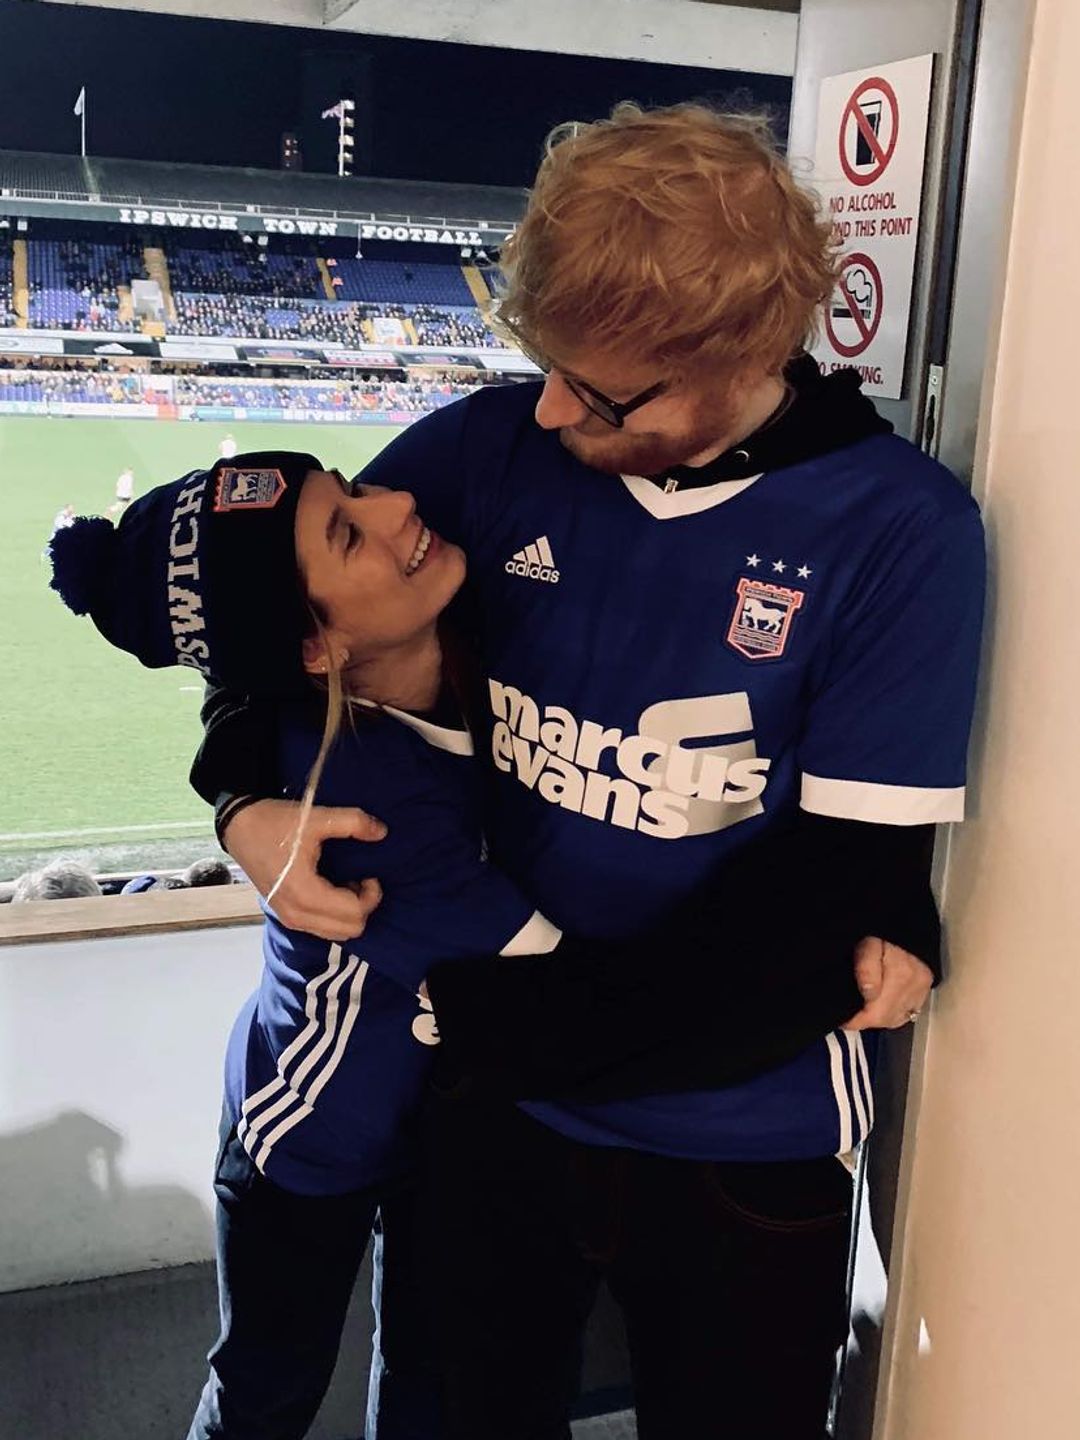 Ed and Cherry looking at eachother lovingly, photographed near a football pitch